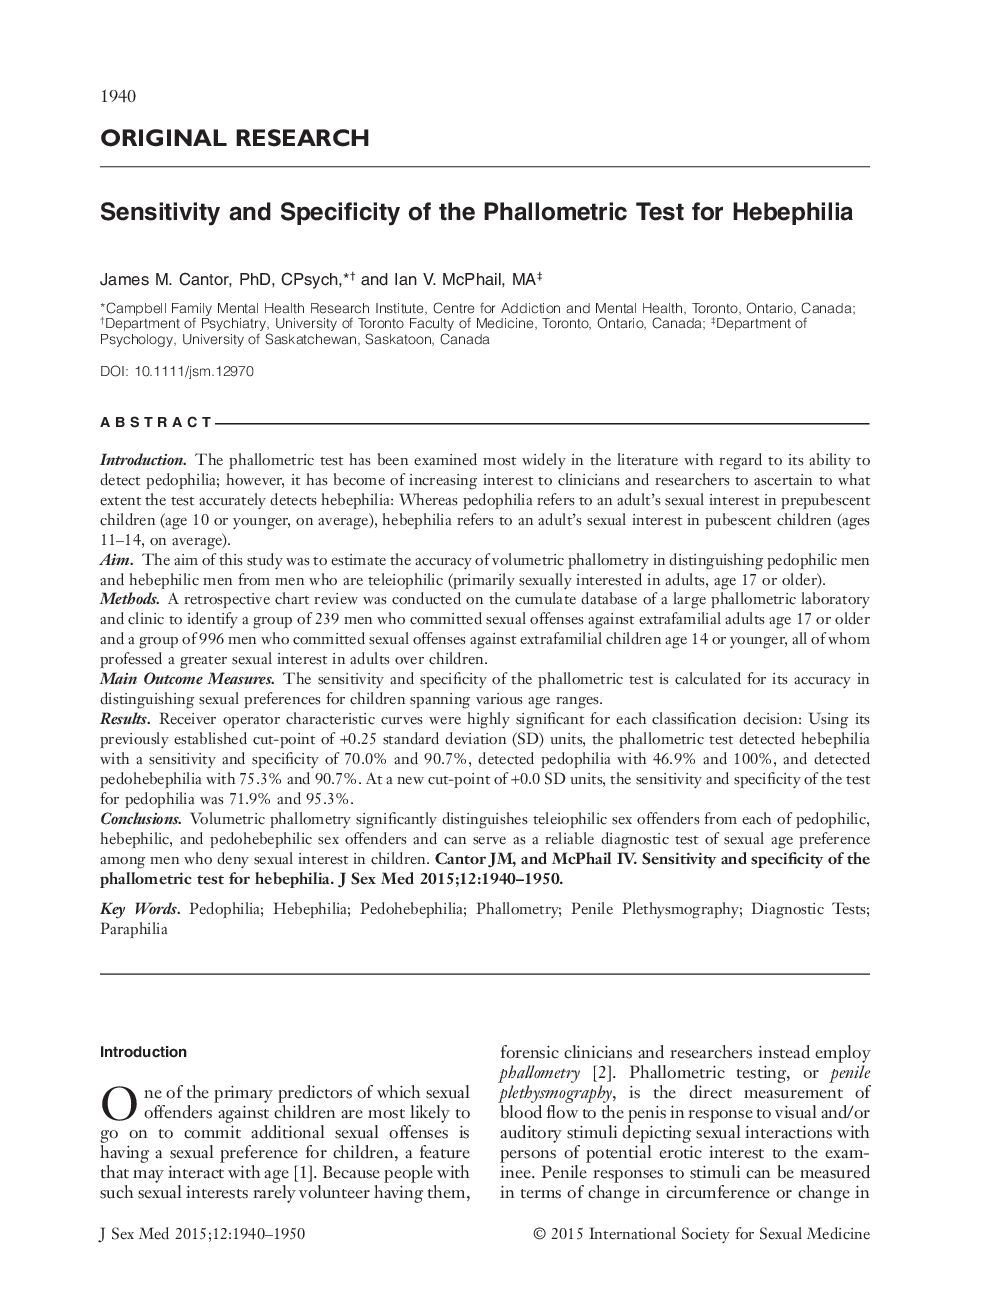 Sensitivity and Specificity of the Phallometric Test for Hebephilia